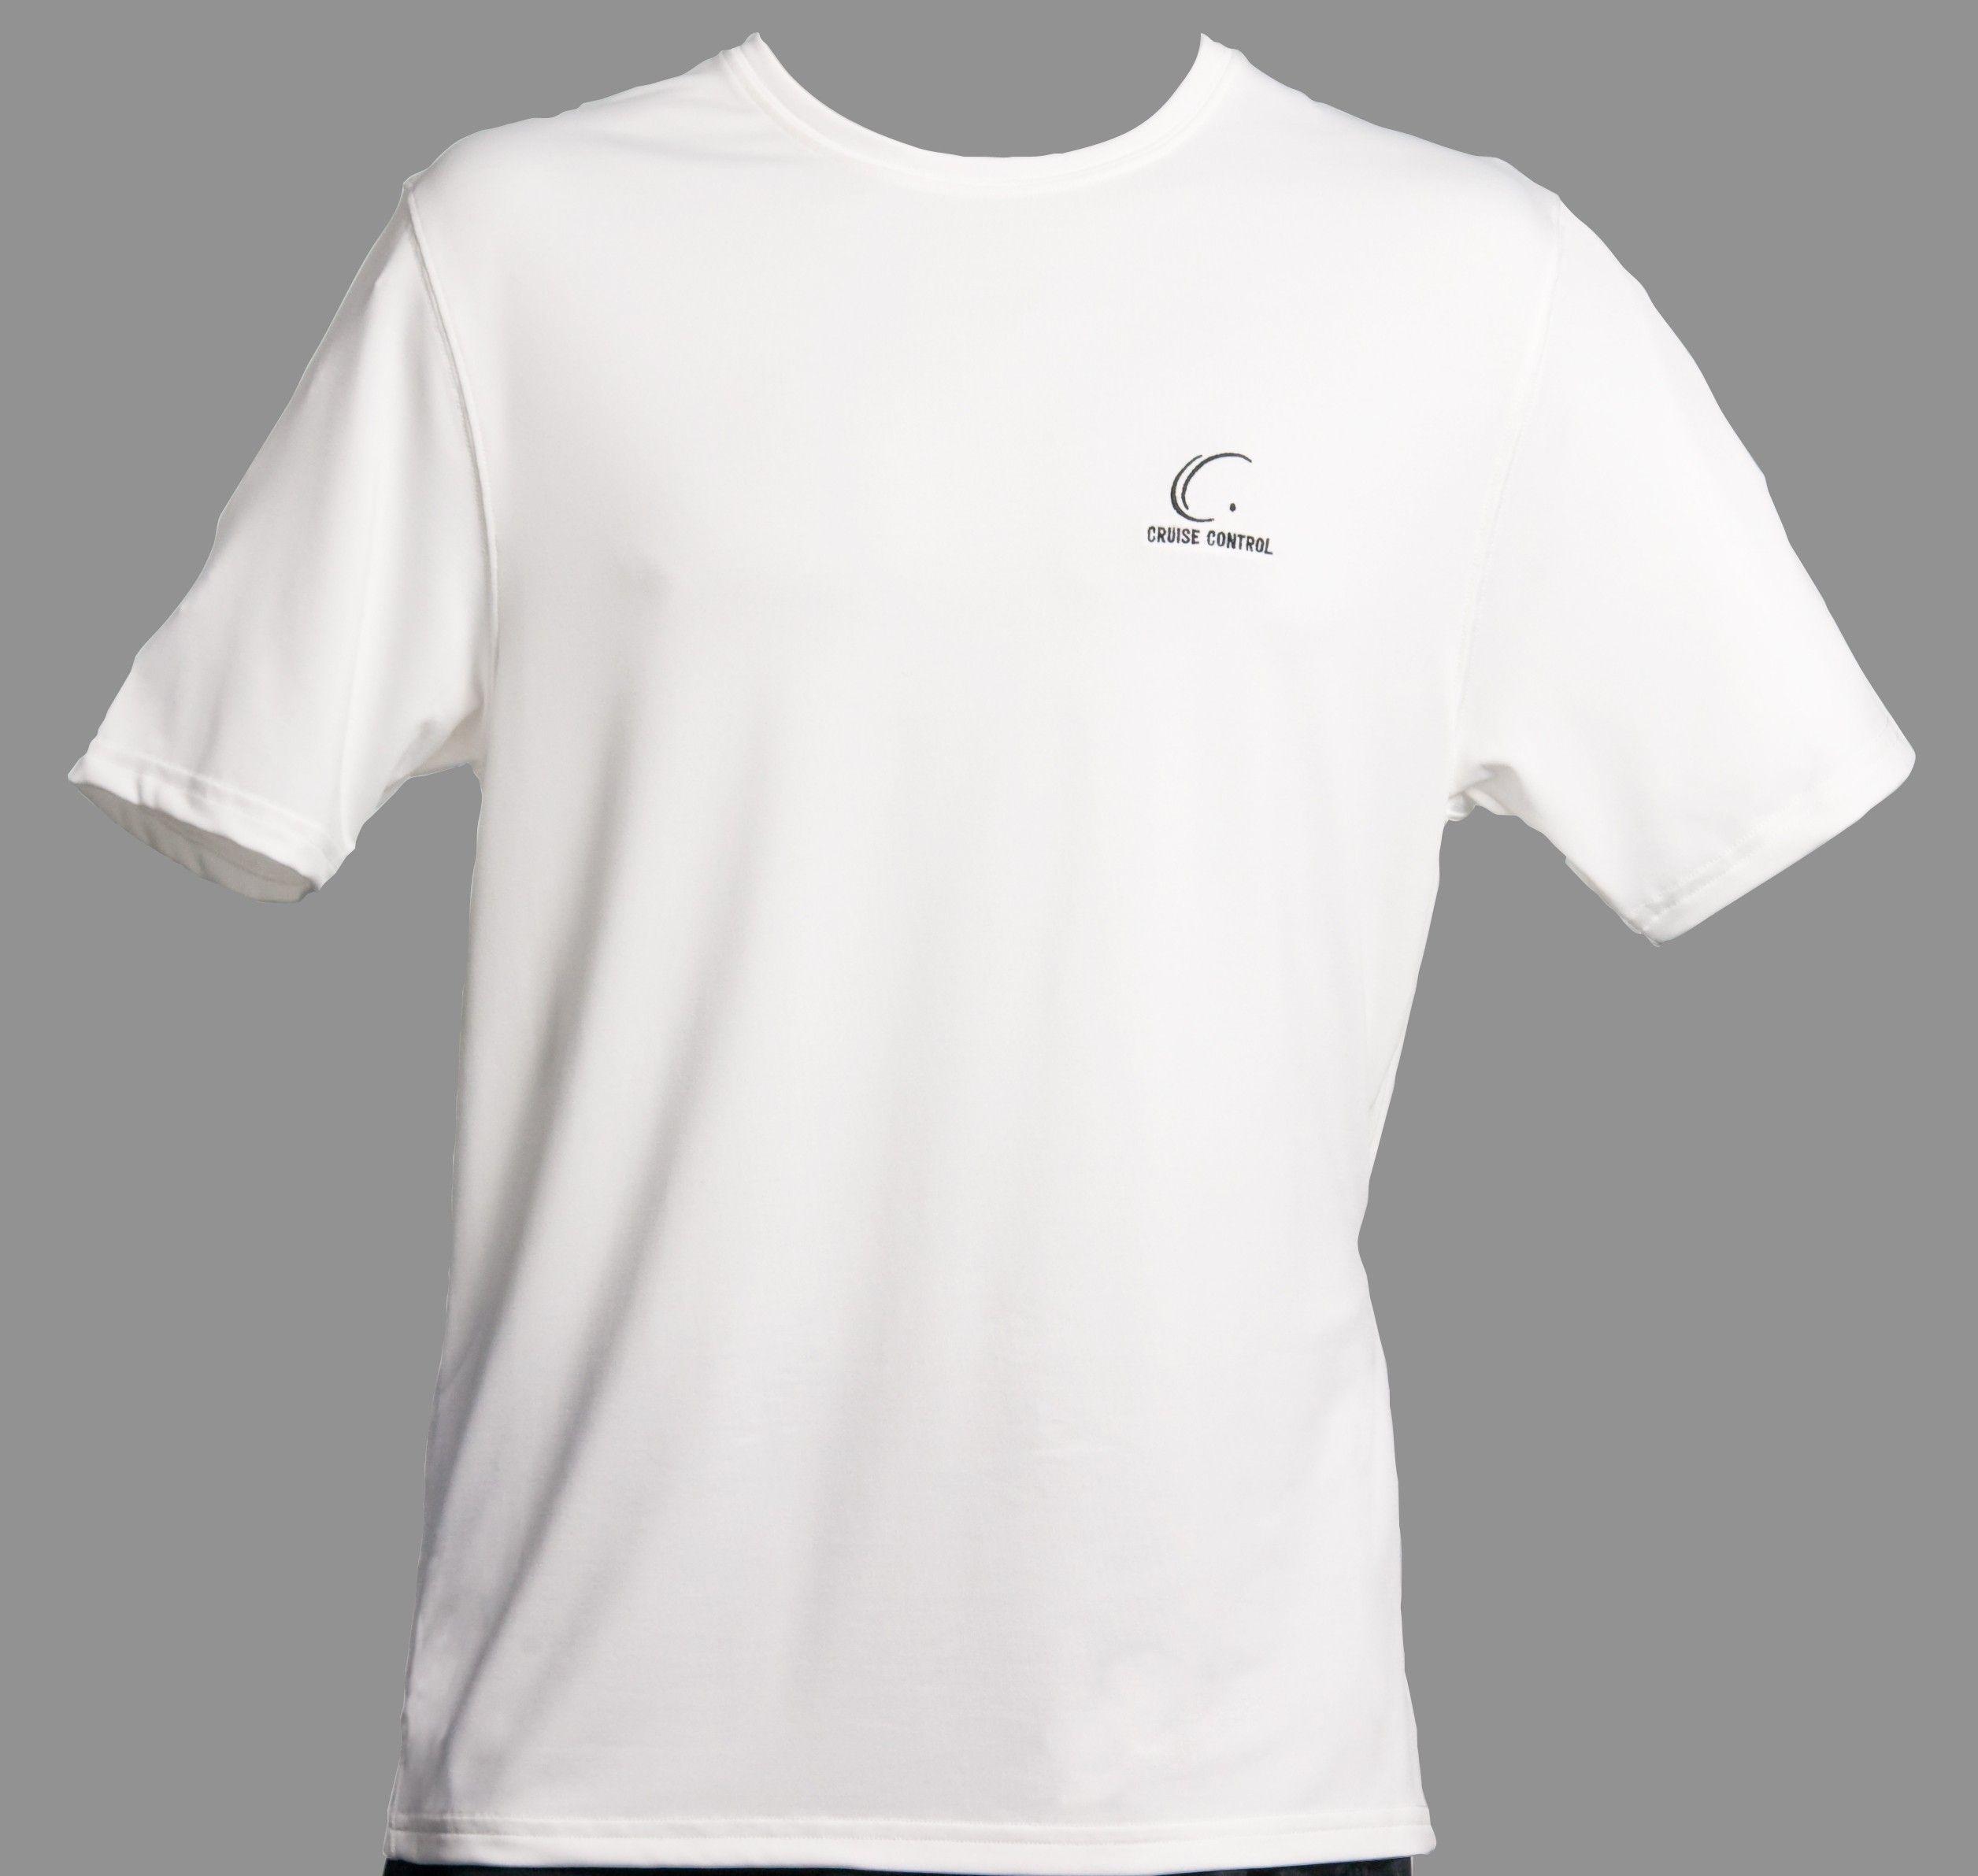 Black and White Athletic Clothing Logo - Men's White Athletic Performance Shirt. Cruise Control Gear